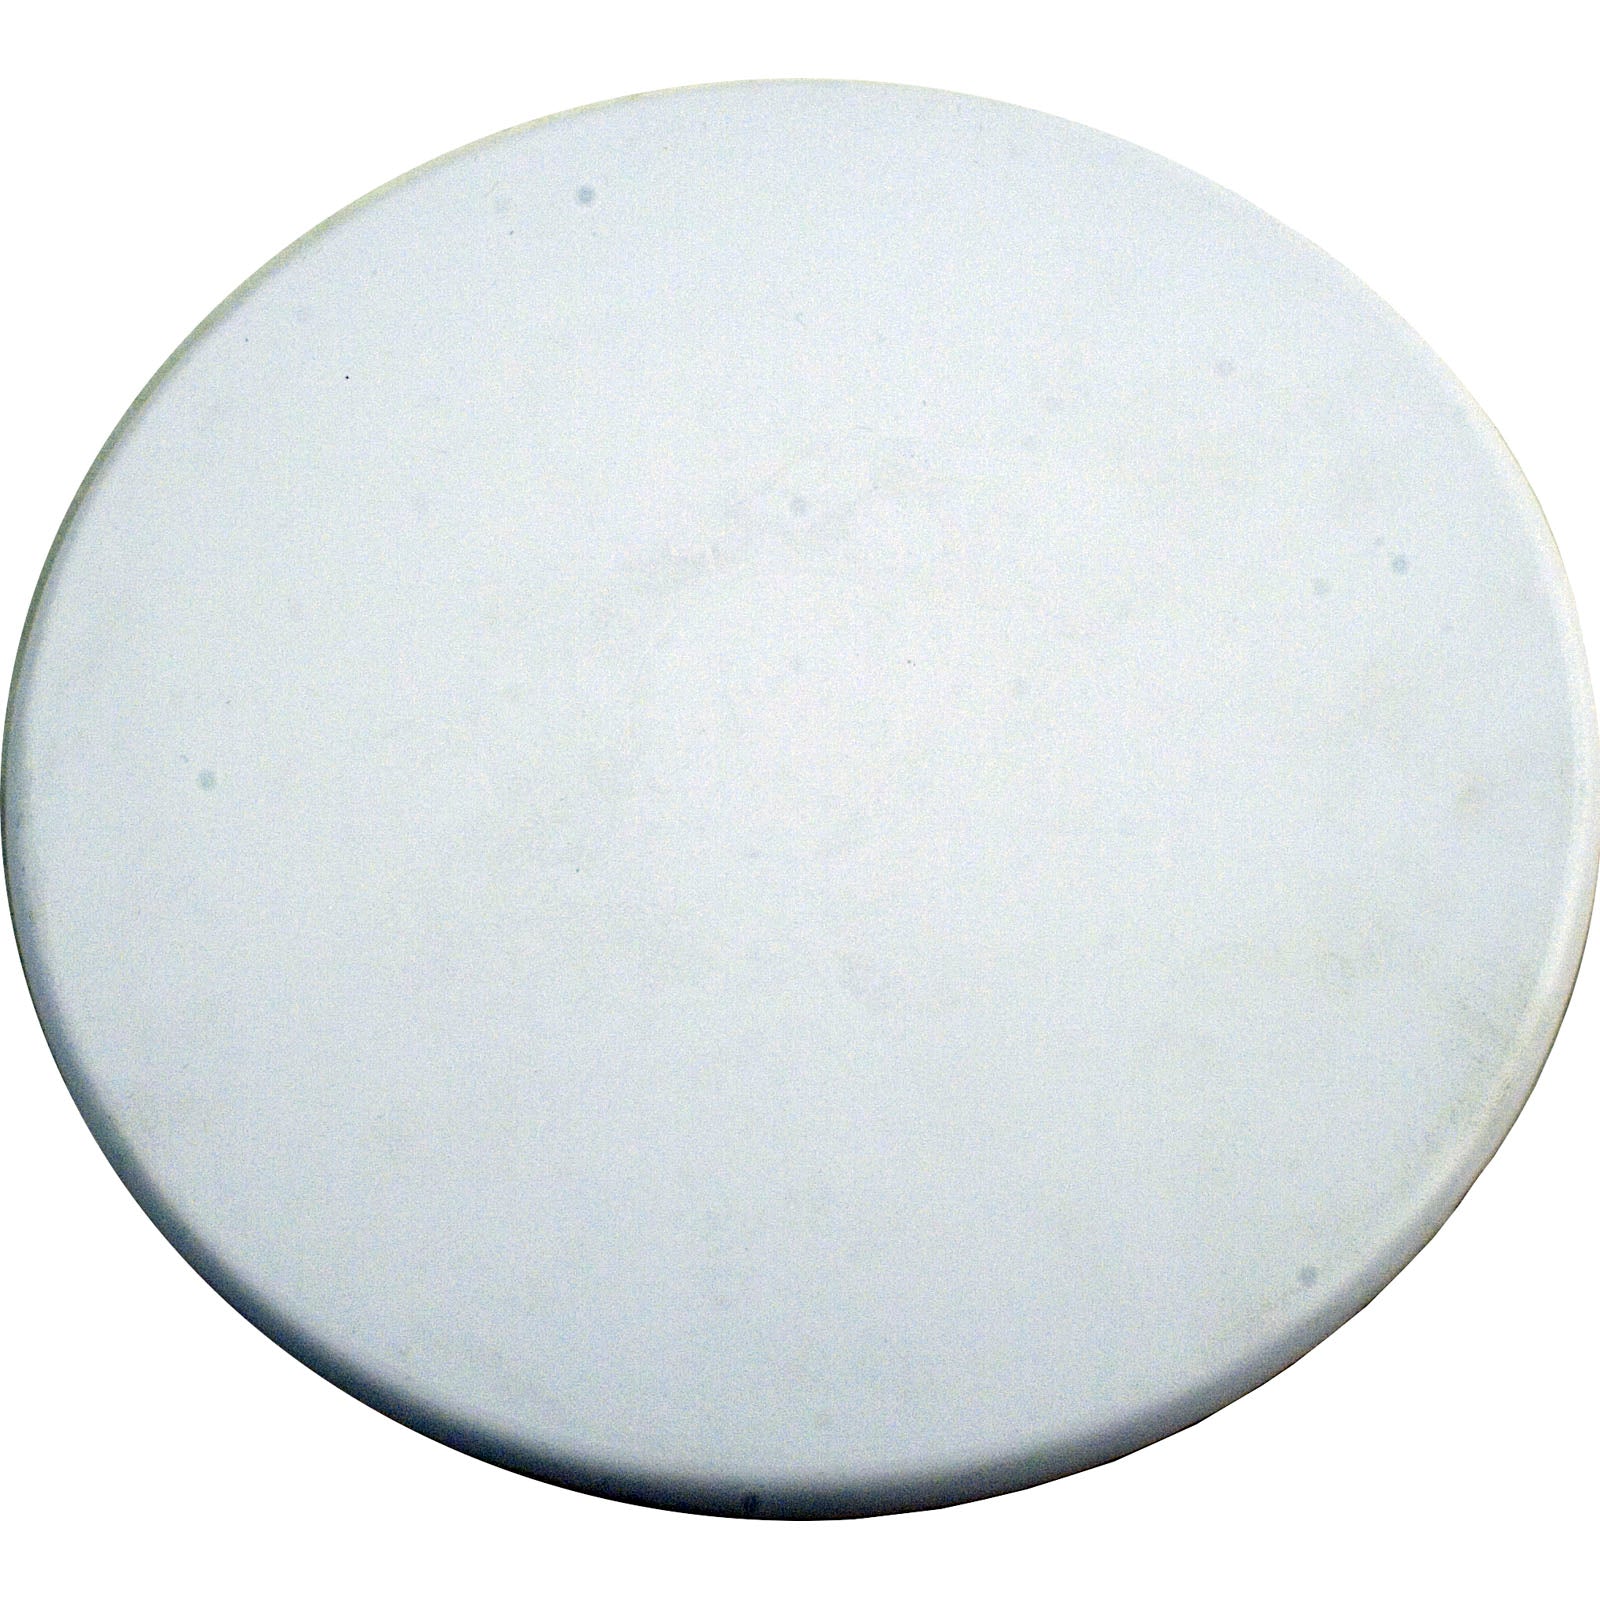 Filter Niche Lid, Pentair Rainbow, Top Load, White- R172611WH